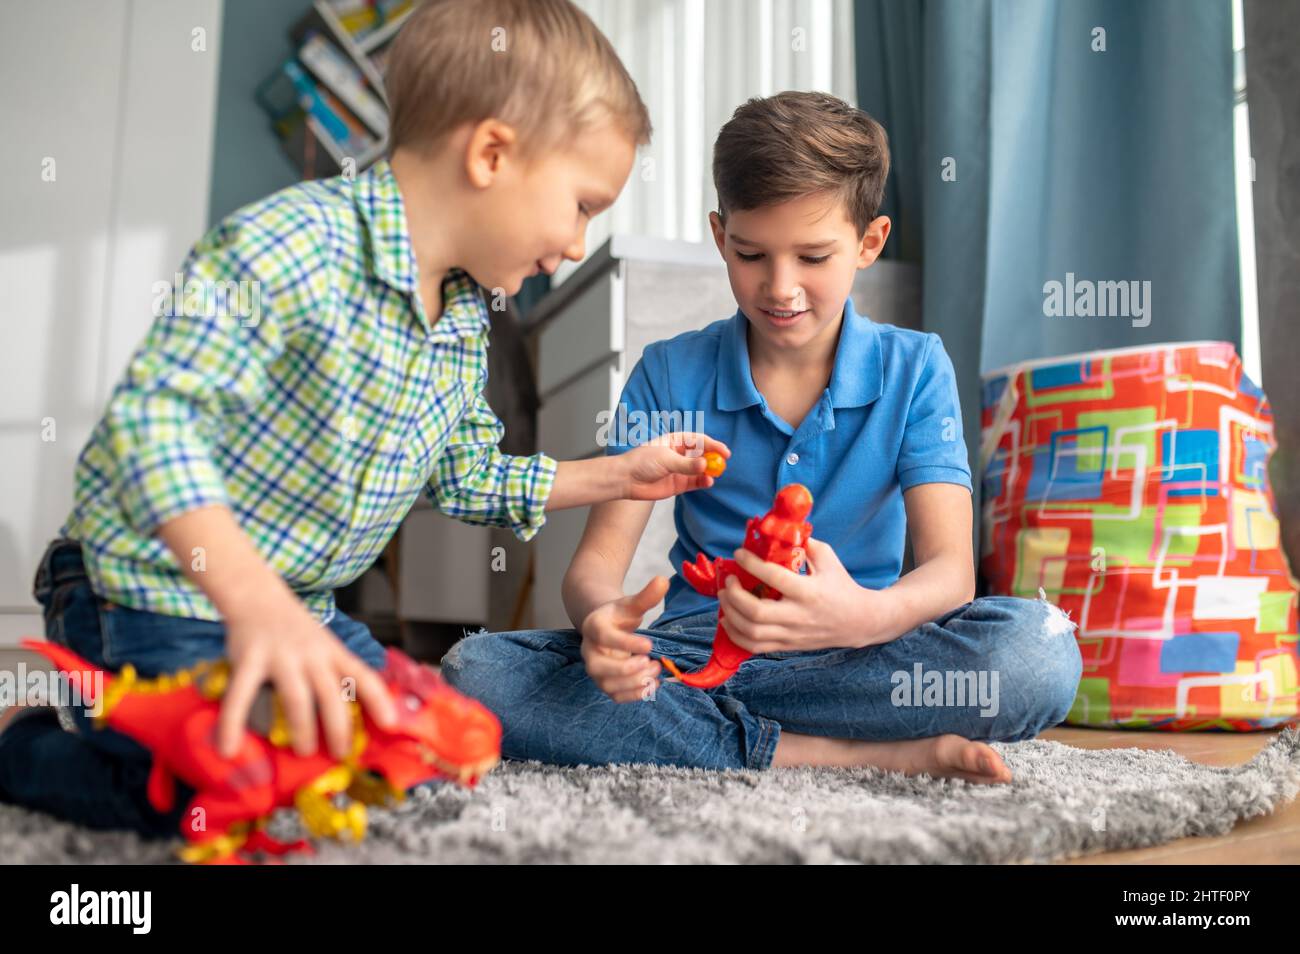 Two children playing with rubber animal figures Stock Photo